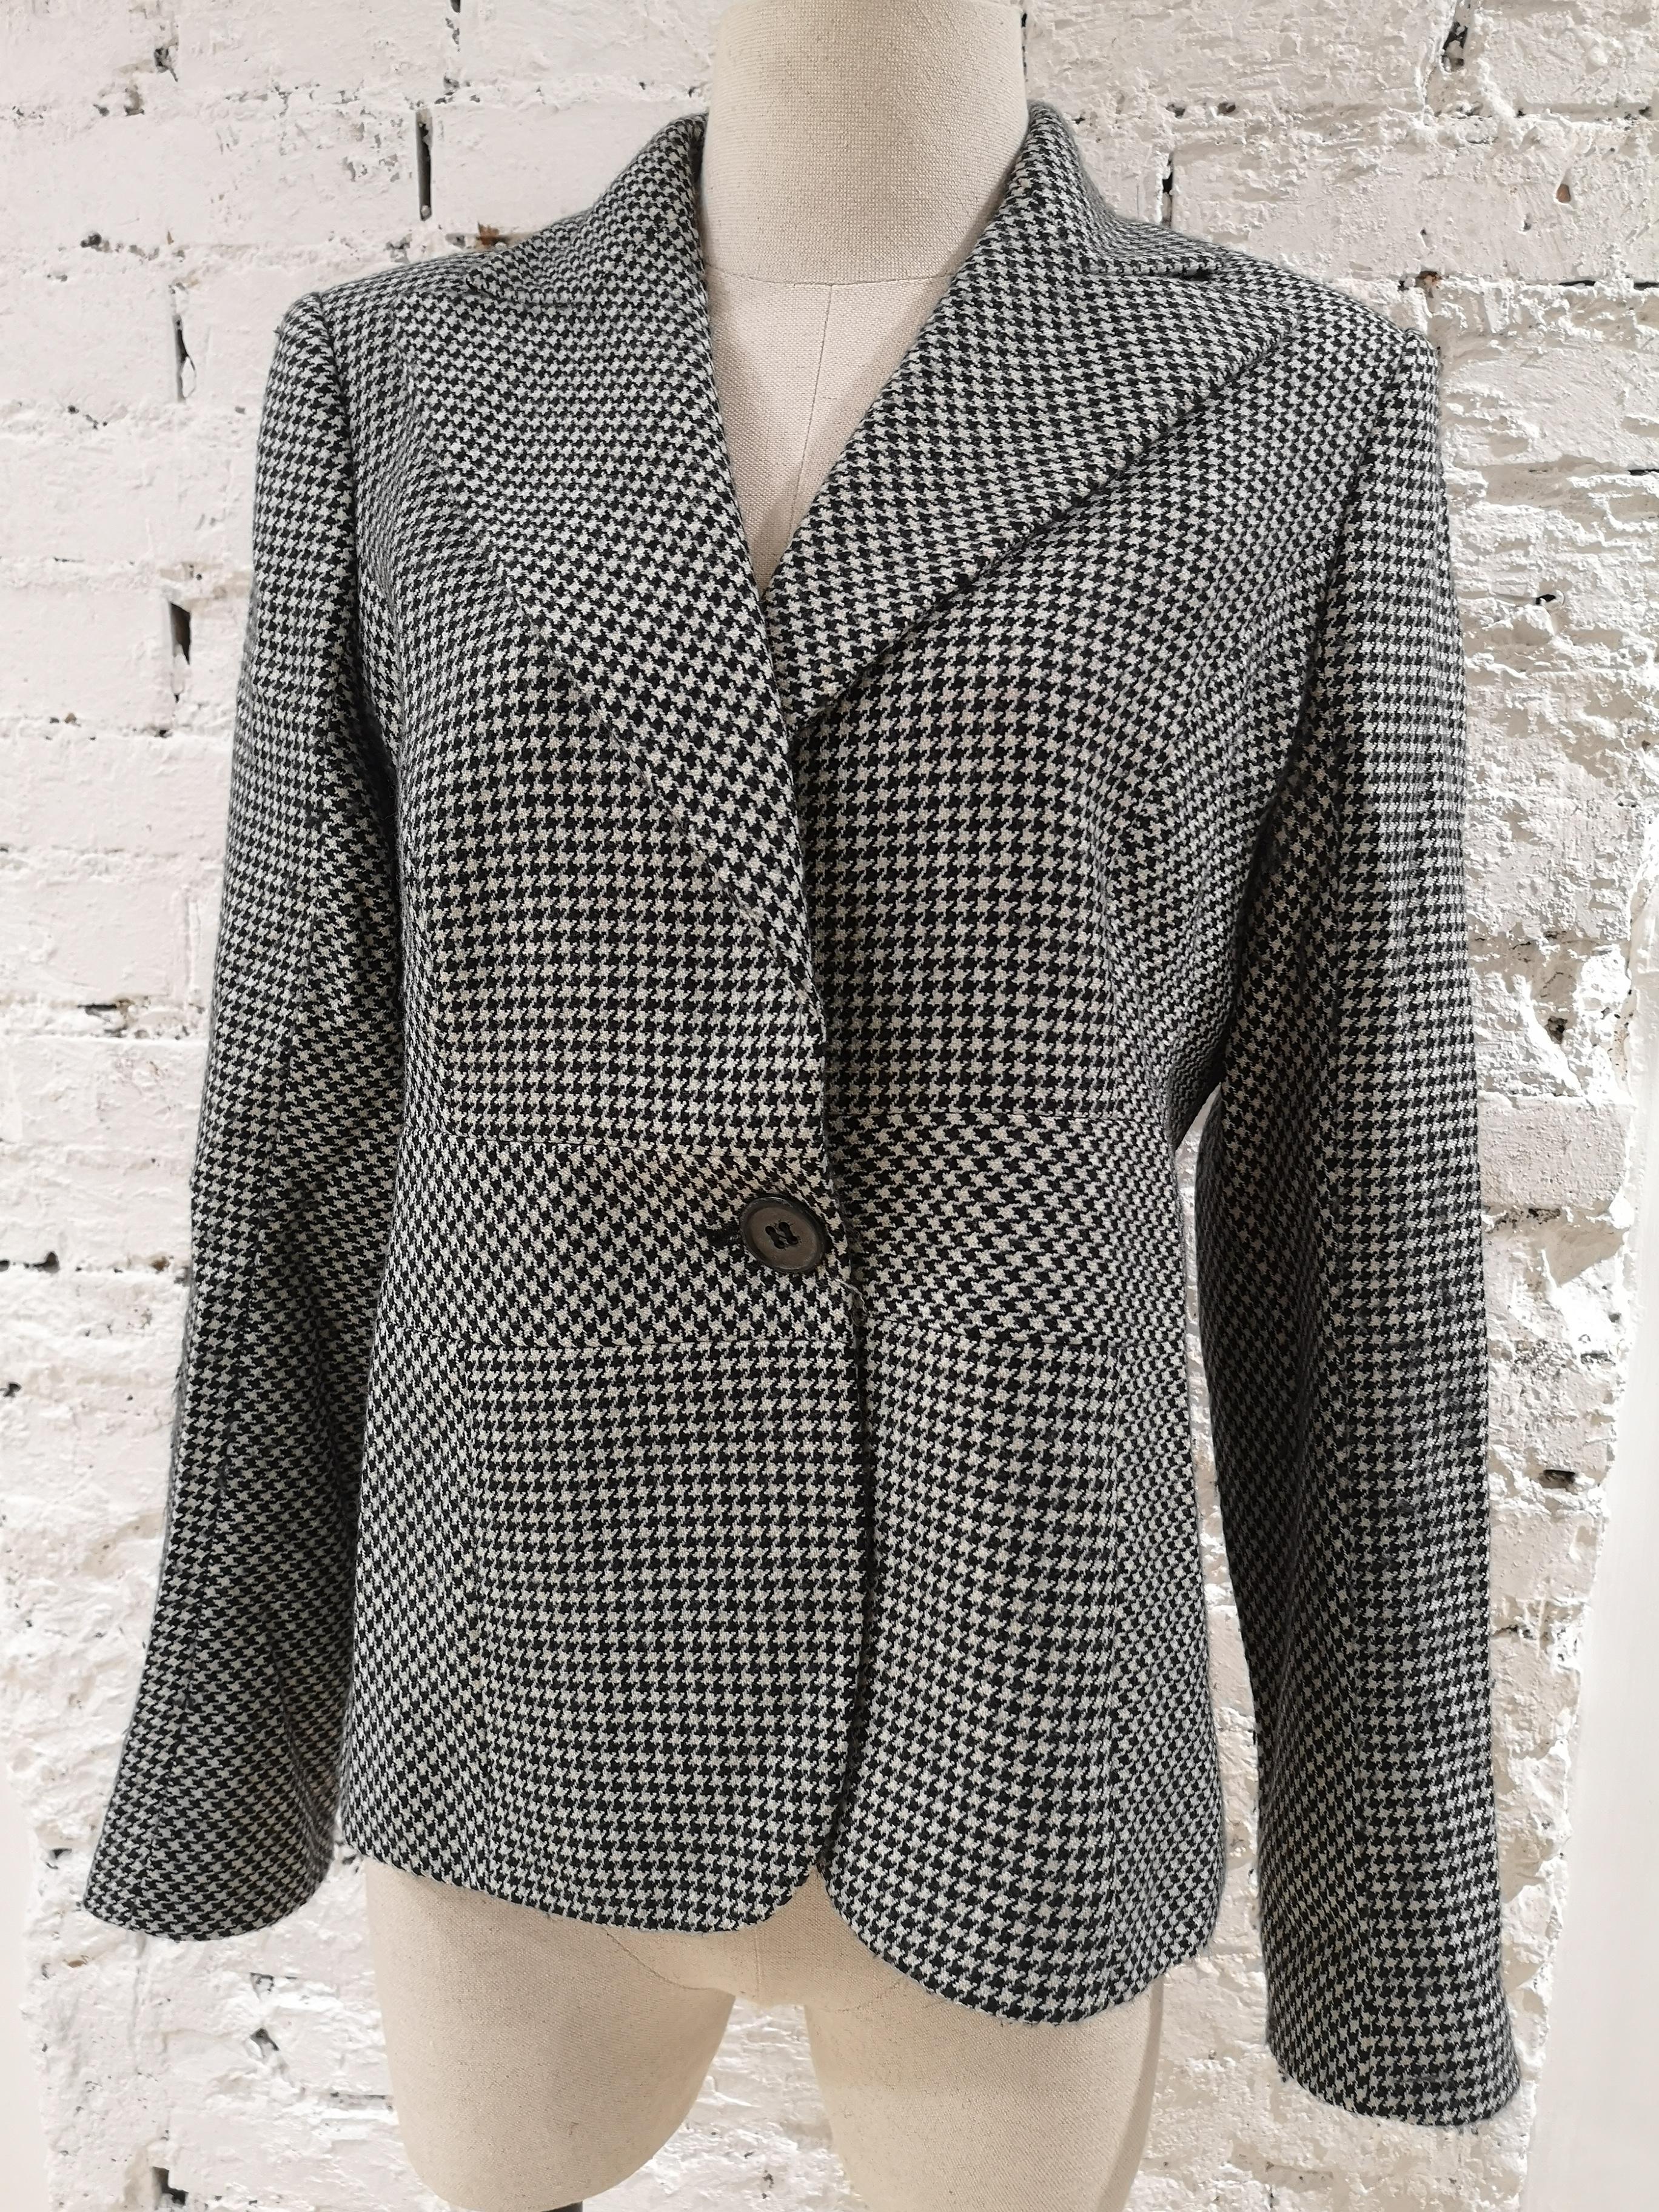 Valentino black and white pied de poule wool jacket
totally made in italy in size 48
red cupro lining